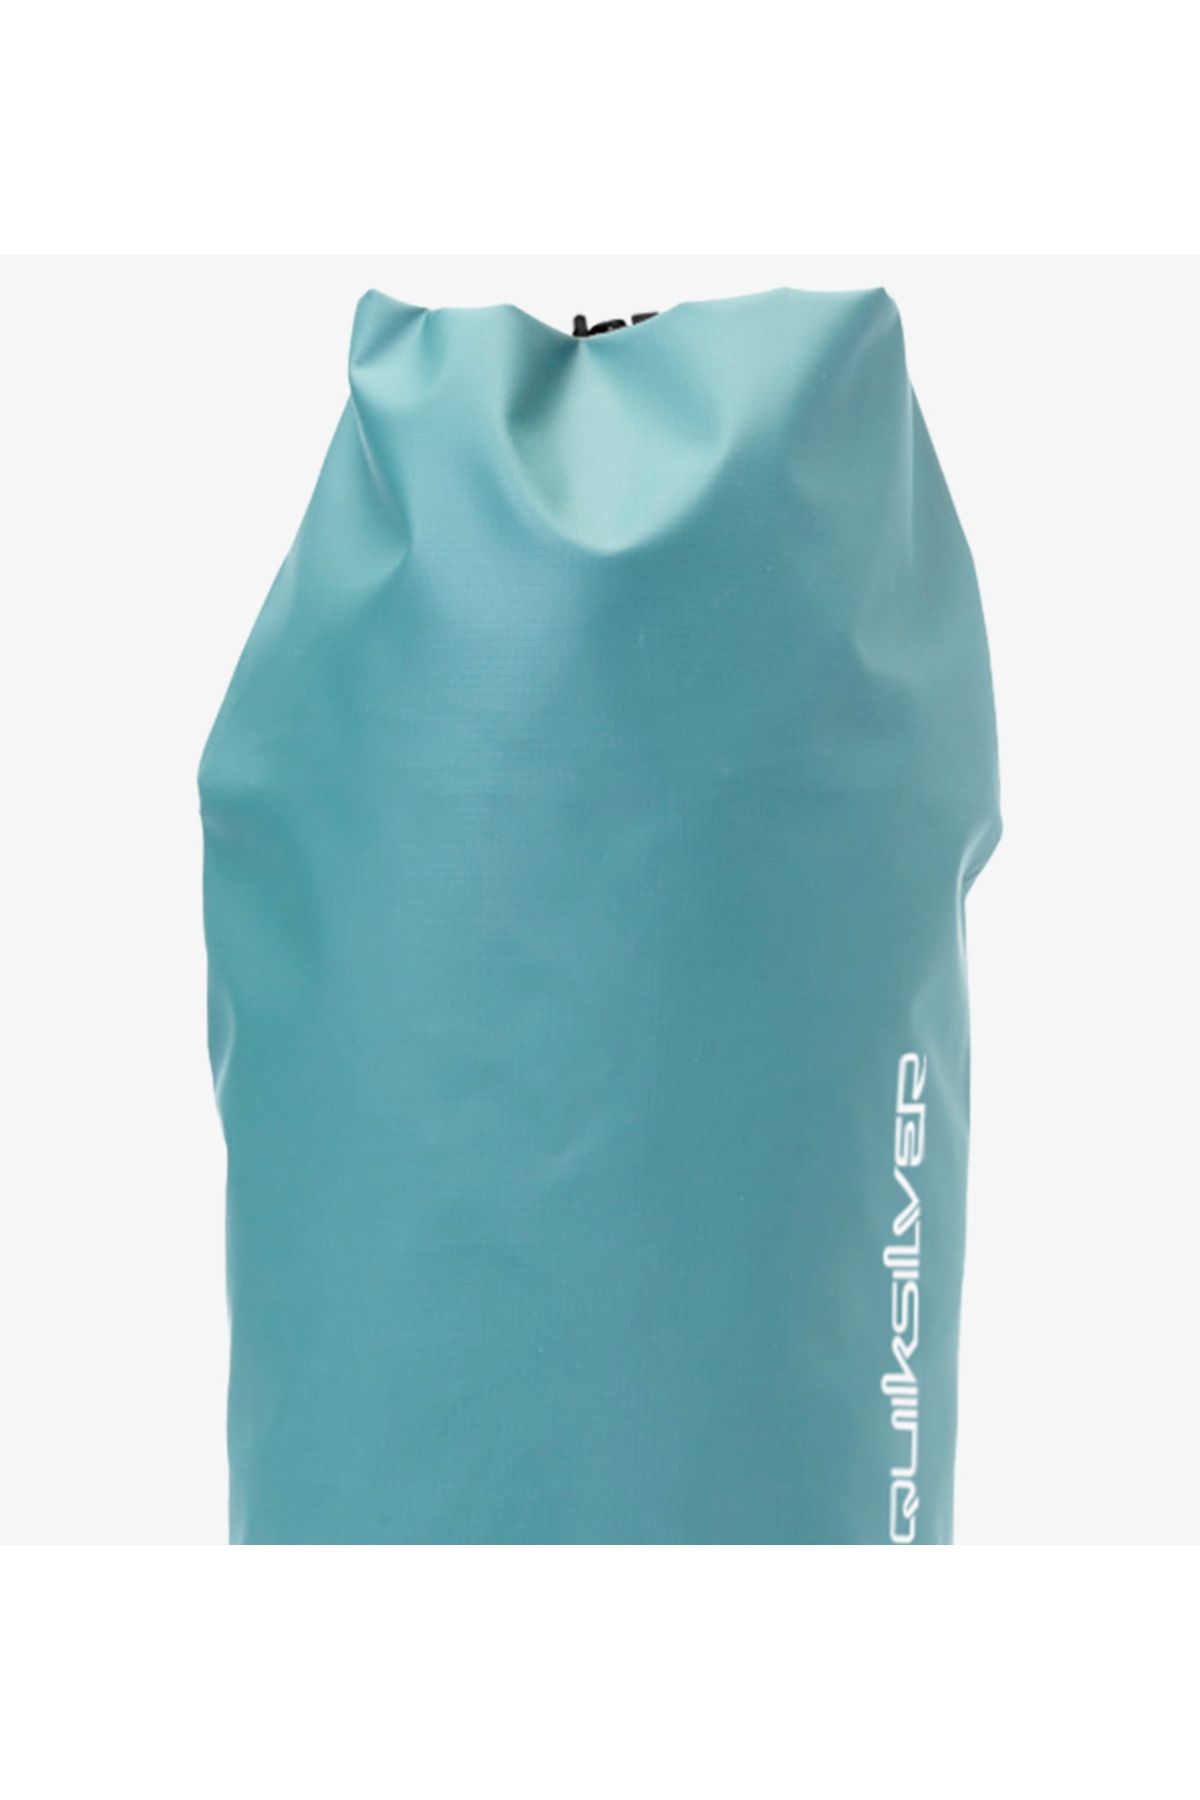 Quiksilver SMALL WATER STASH 5 L